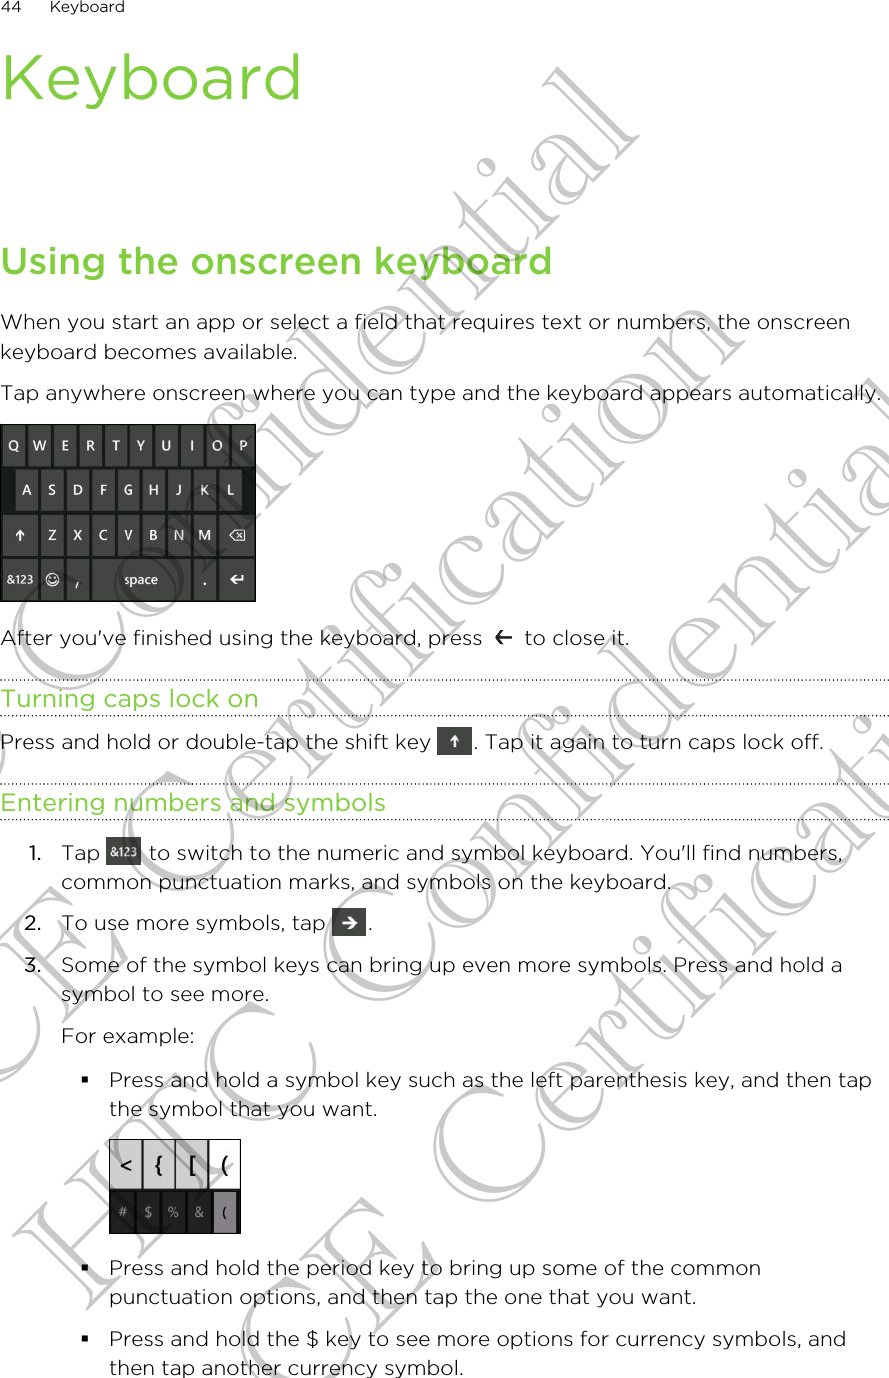 KeyboardUsing the onscreen keyboardWhen you start an app or select a field that requires text or numbers, the onscreenkeyboard becomes available.Tap anywhere onscreen where you can type and the keyboard appears automatically. After you&apos;ve finished using the keyboard, press   to close it.Turning caps lock onPress and hold or double-tap the shift key  . Tap it again to turn caps lock off.Entering numbers and symbols1. Tap   to switch to the numeric and symbol keyboard. You&apos;ll find numbers,common punctuation marks, and symbols on the keyboard.2. To use more symbols, tap  .3. Some of the symbol keys can bring up even more symbols. Press and hold asymbol to see more. For example:§Press and hold a symbol key such as the left parenthesis key, and then tapthe symbol that you want.§Press and hold the period key to bring up some of the commonpunctuation options, and then tap the one that you want.§Press and hold the $ key to see more options for currency symbols, andthen tap another currency symbol.44 KeyboardHTC Confidential CE Certification HTC Confidential CE Certification